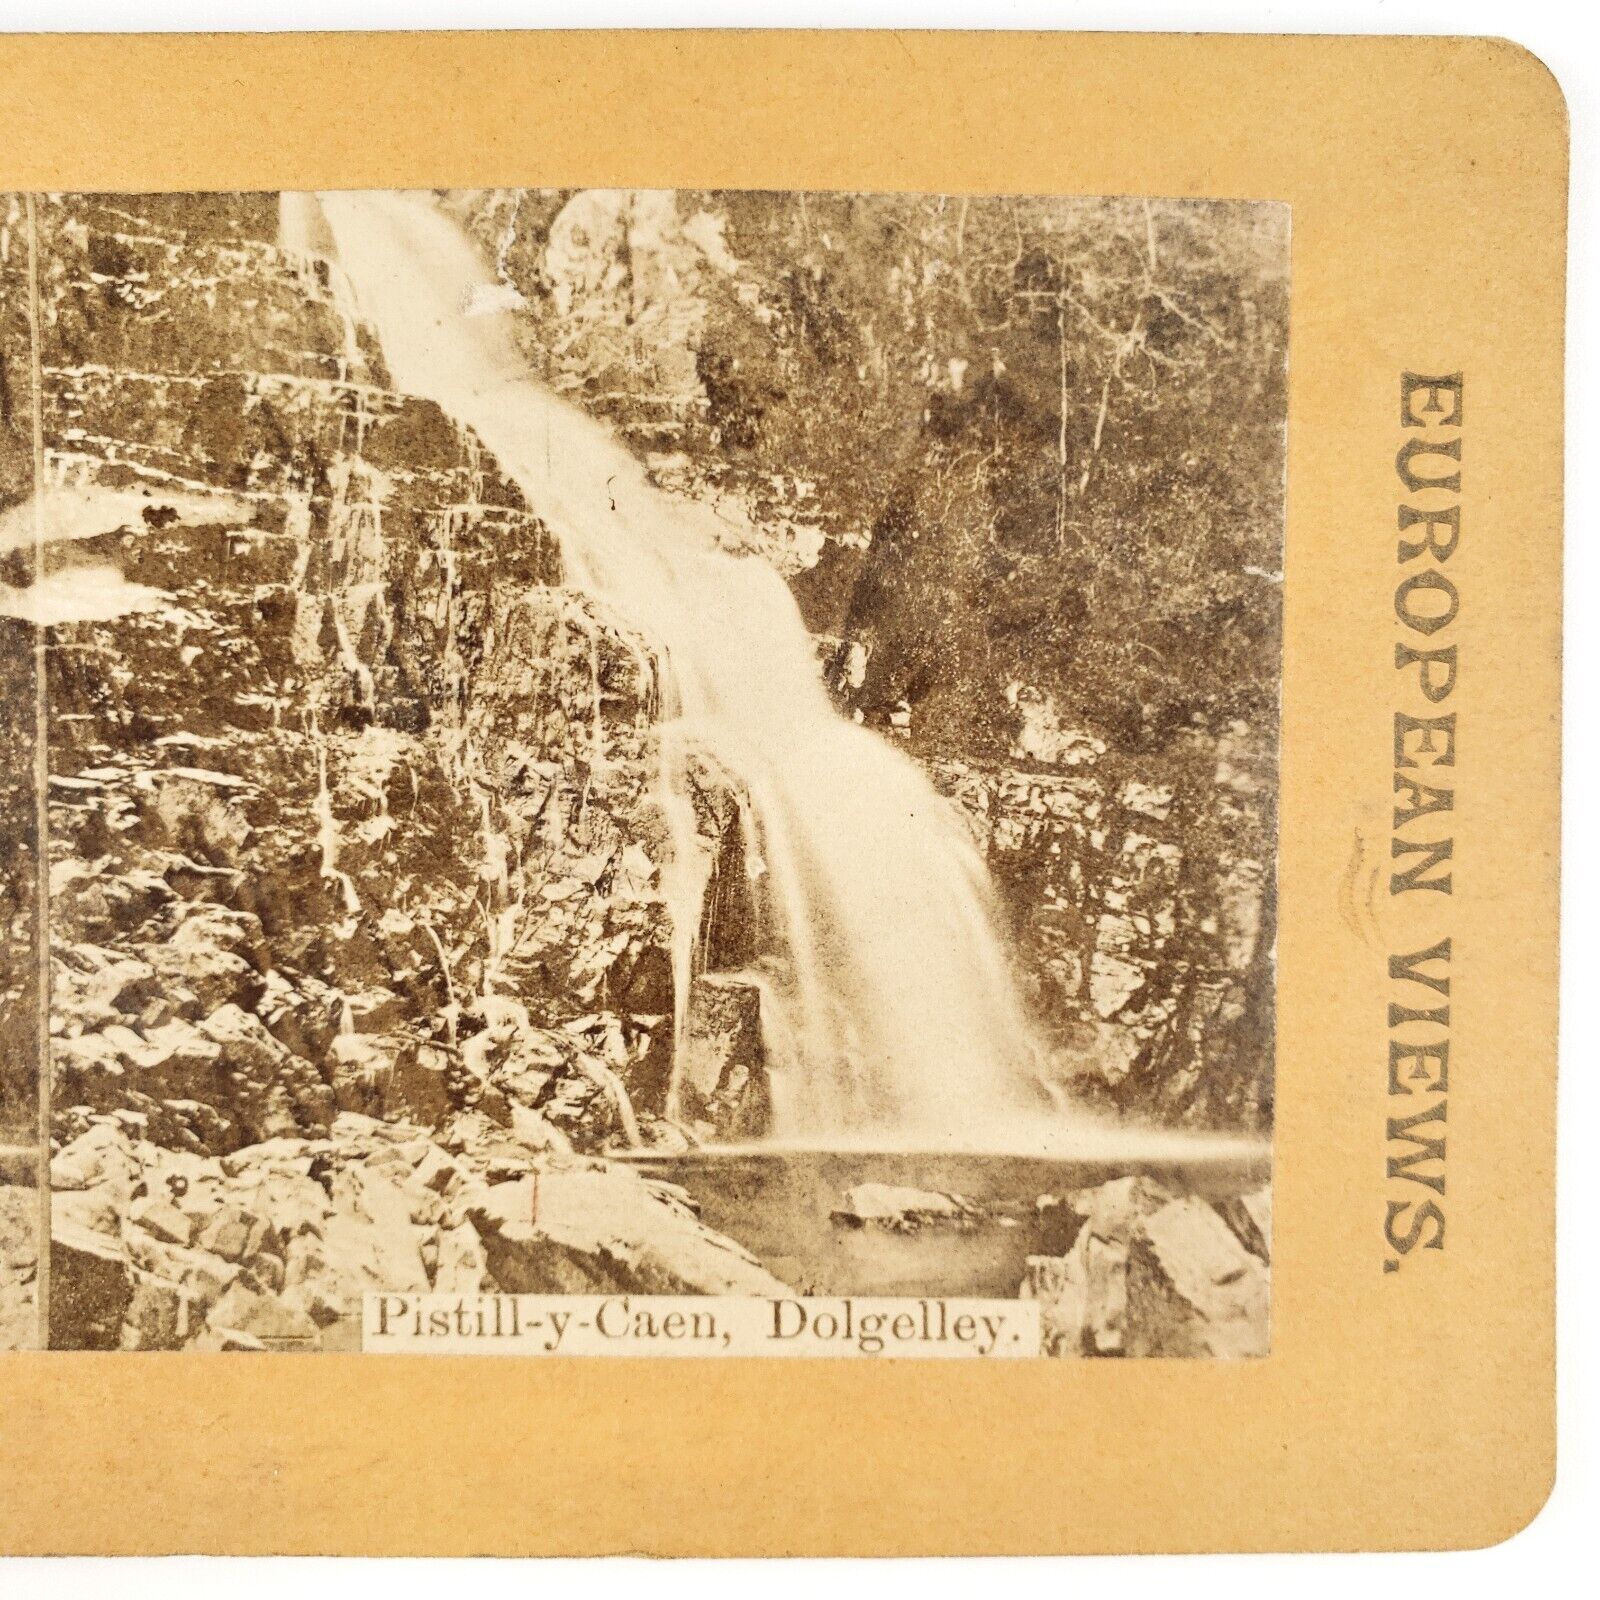 Pistyll Cain Welsh Waterfall Stereoview c1880 North Wales Meirionnydd Falls G809